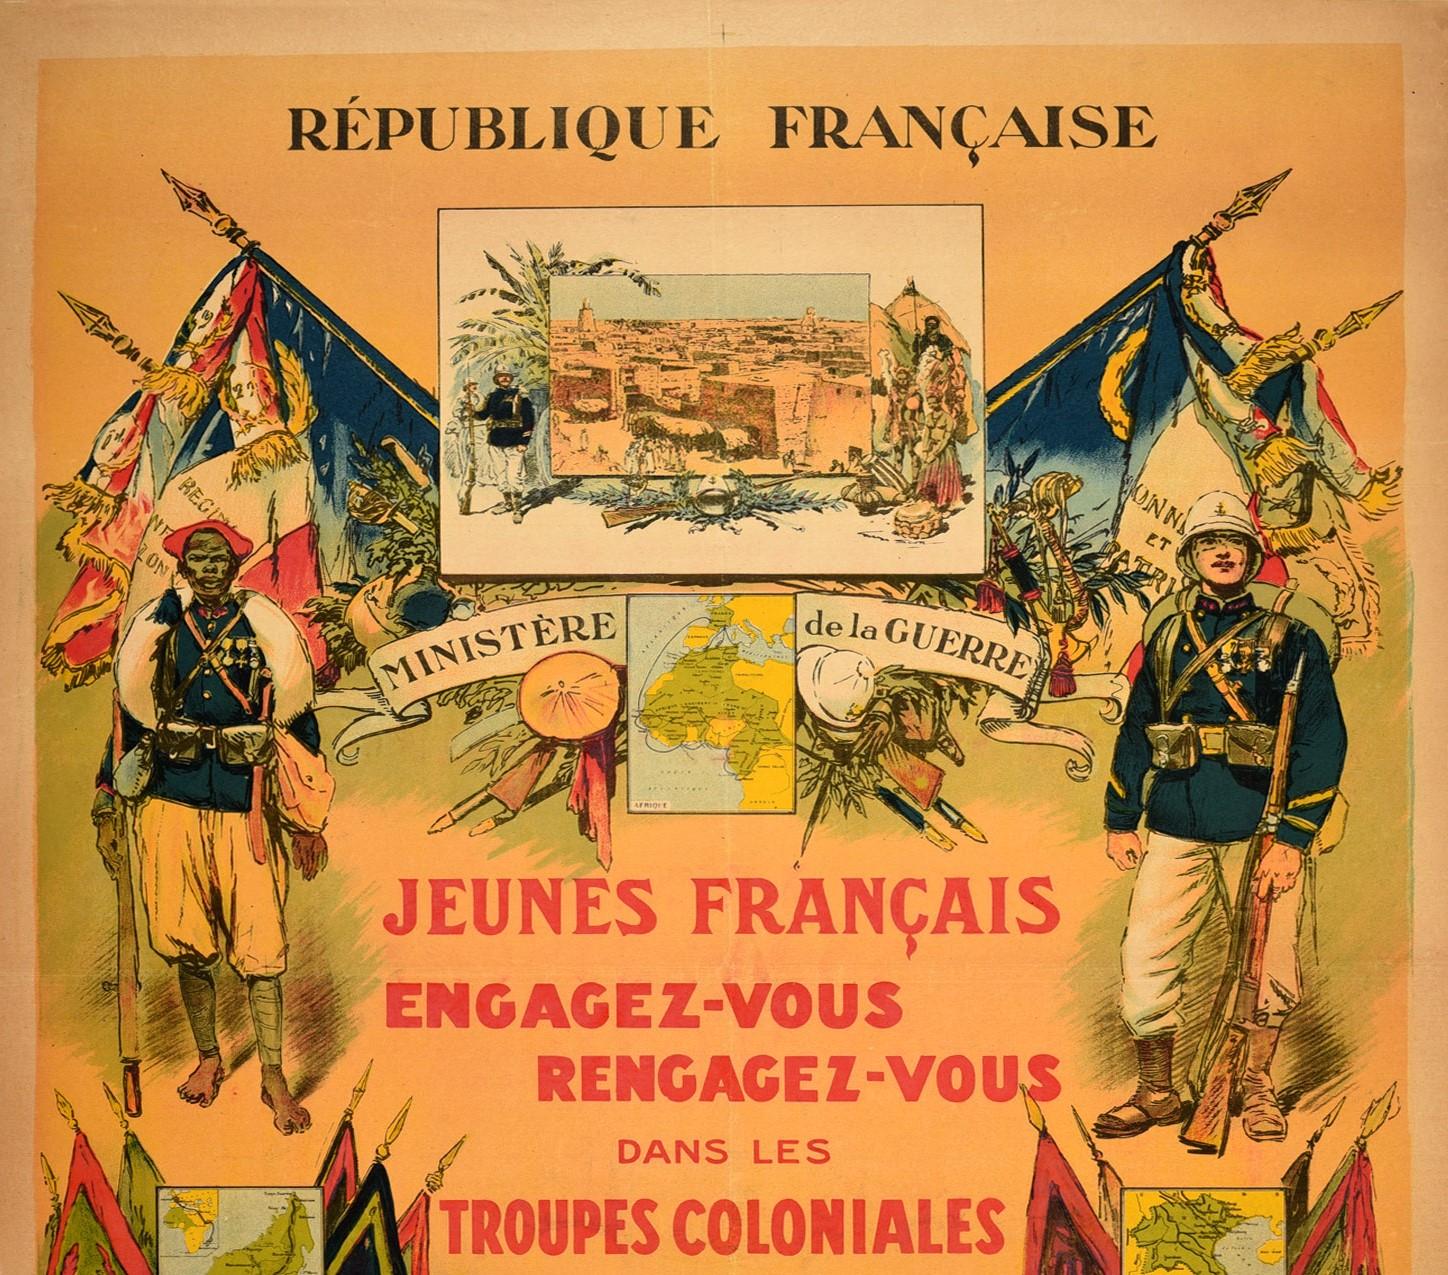 Original vintage military recruitment poster encouraging Young French people to join or rejoin the Colonial Troops - Jeunes Francais Engagez-vous Rengagez-vous dans les Troupes Coloniales. Colourful design by the French war correspondent and